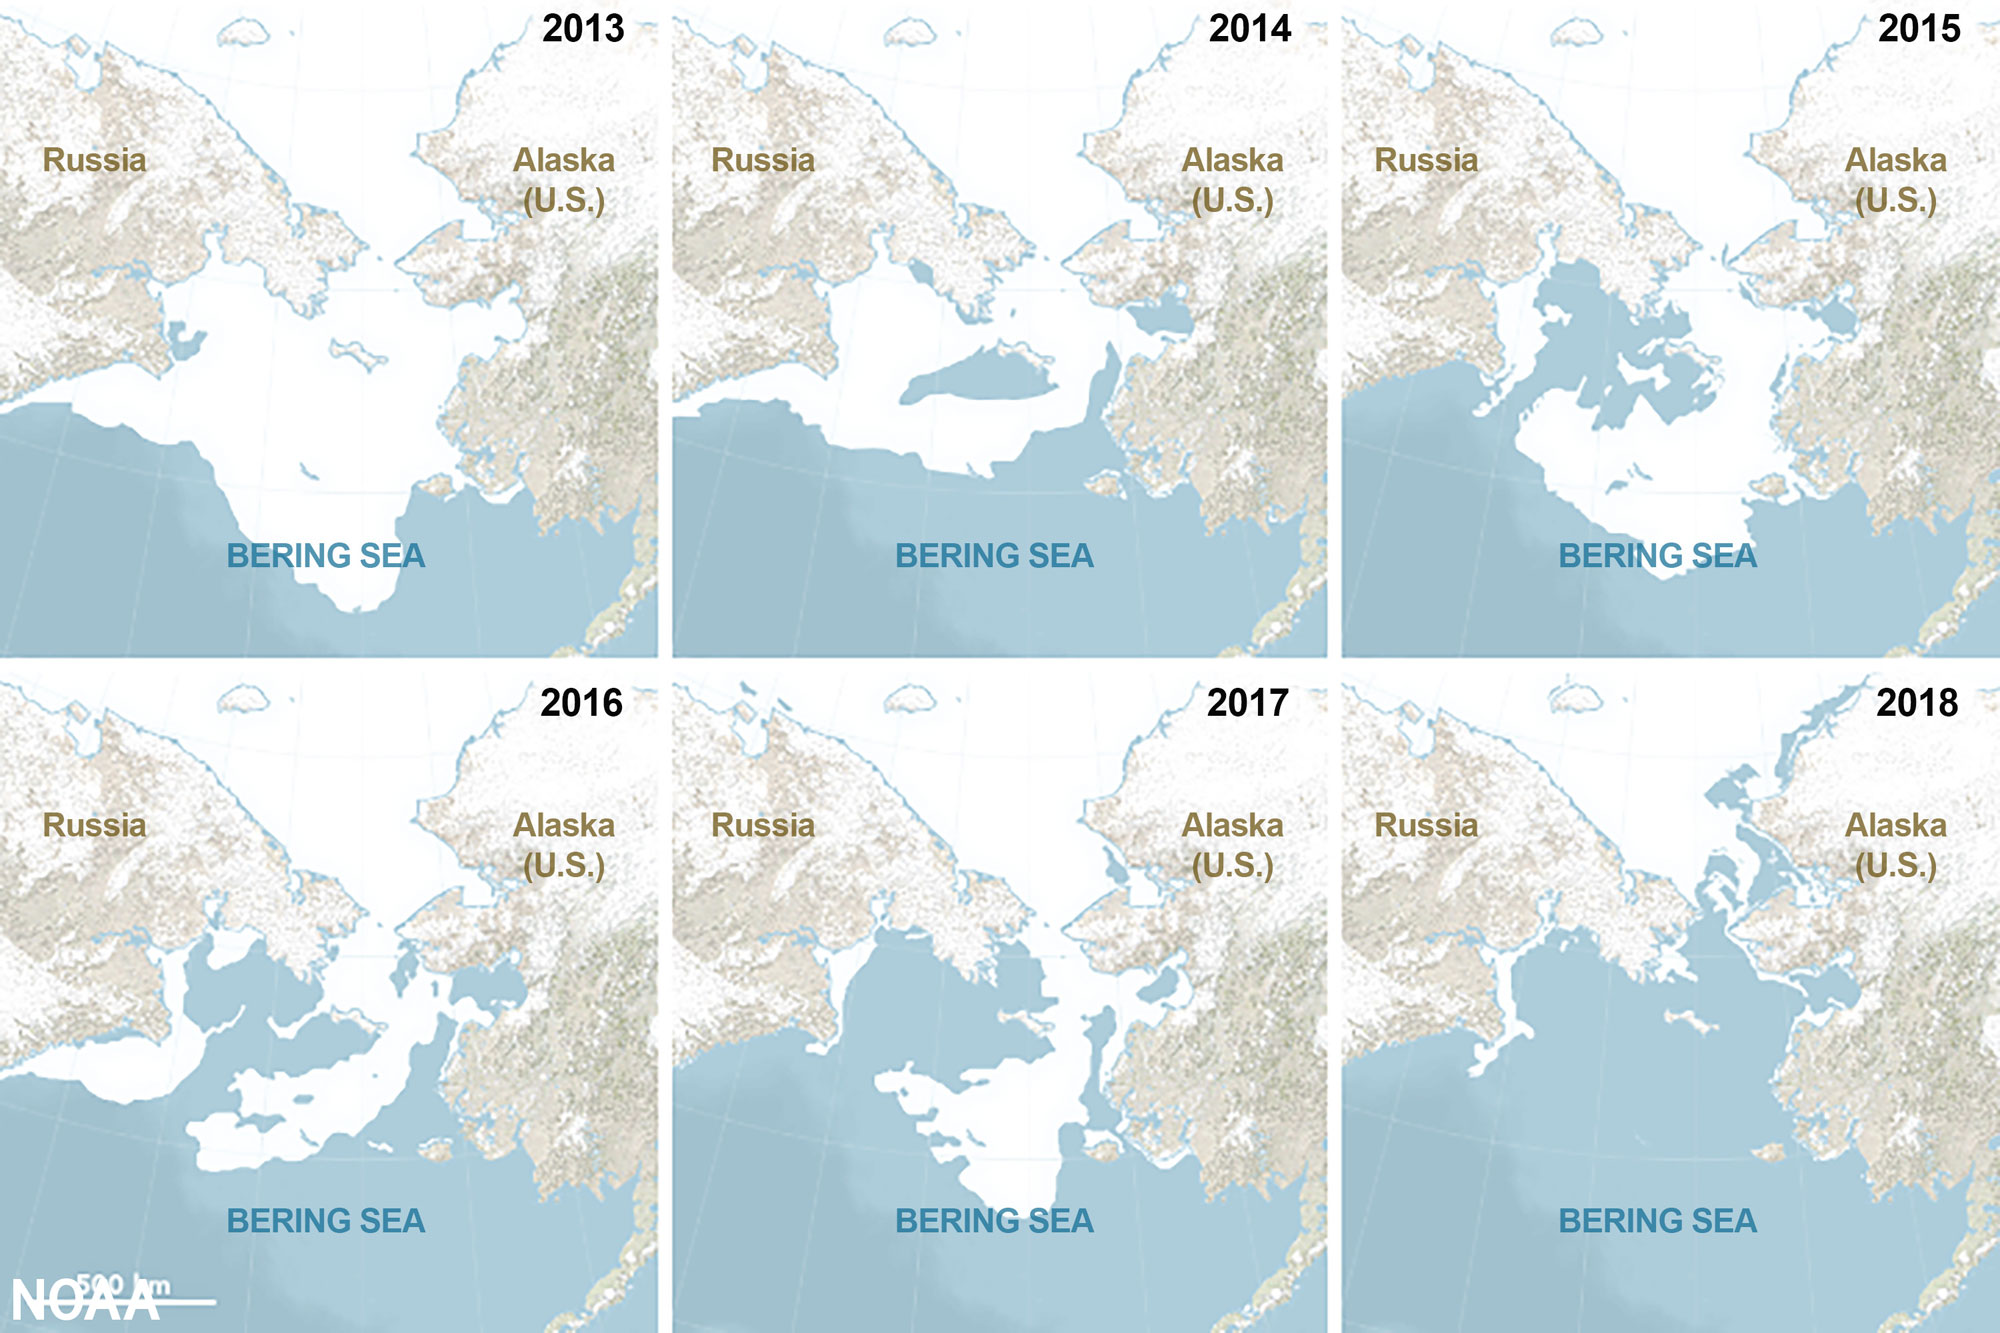 Maps showing the Bearing Sea region with Alaska to the east and Russia to the west. The maps are a time series showing the maximum extent of sea ice each year from 2013 to 2018. The ice cover is greatest in 2013 and least in 2018. It varies a bit between 2014 and 2017.